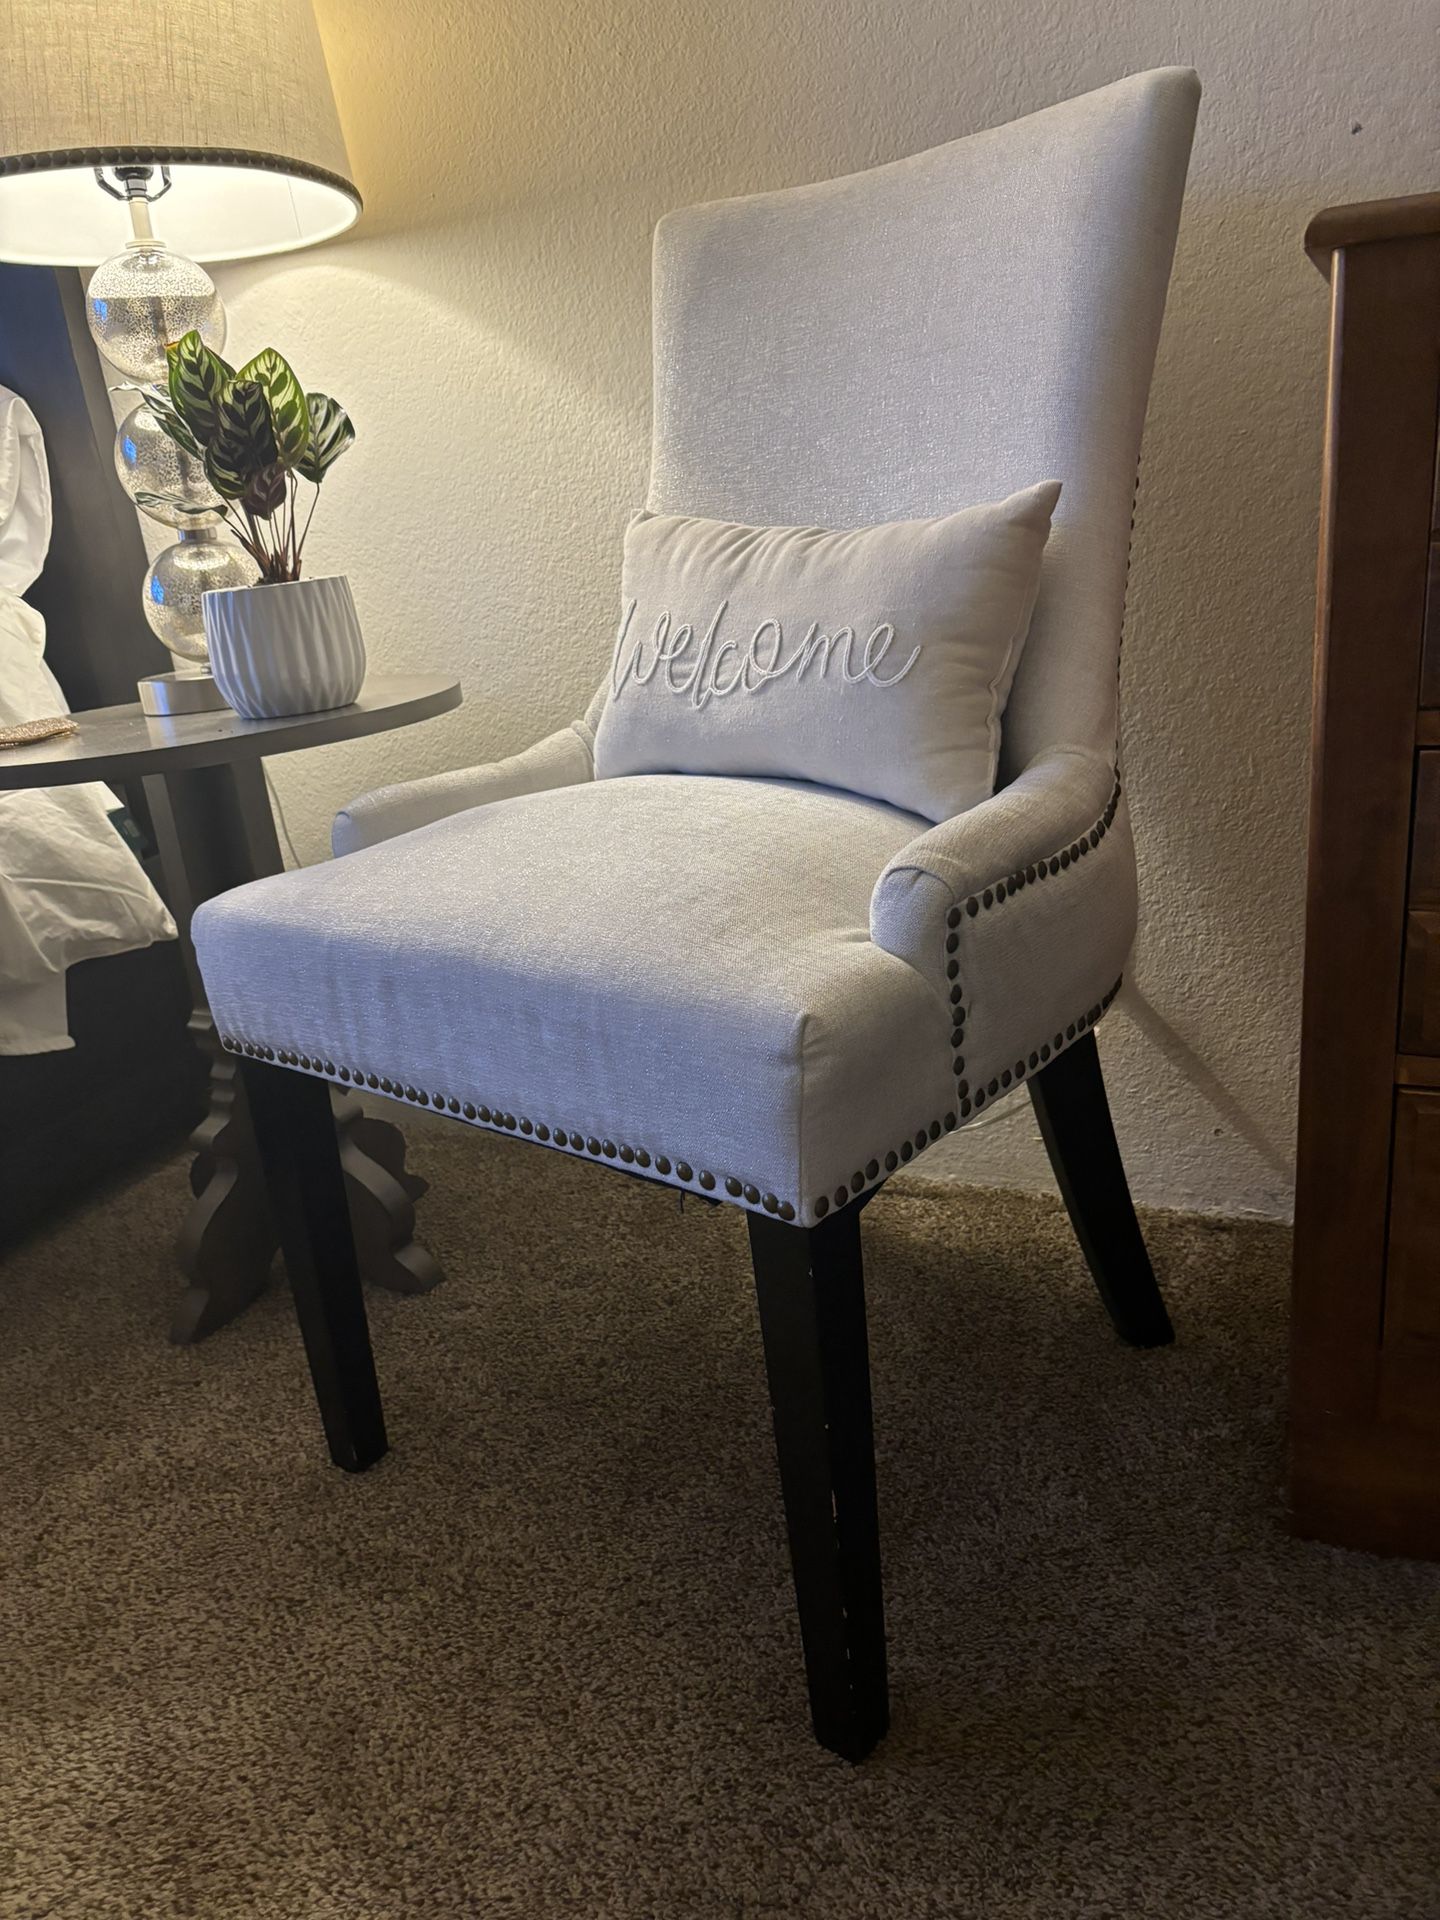 Decorative Bedroom Or Study Chair